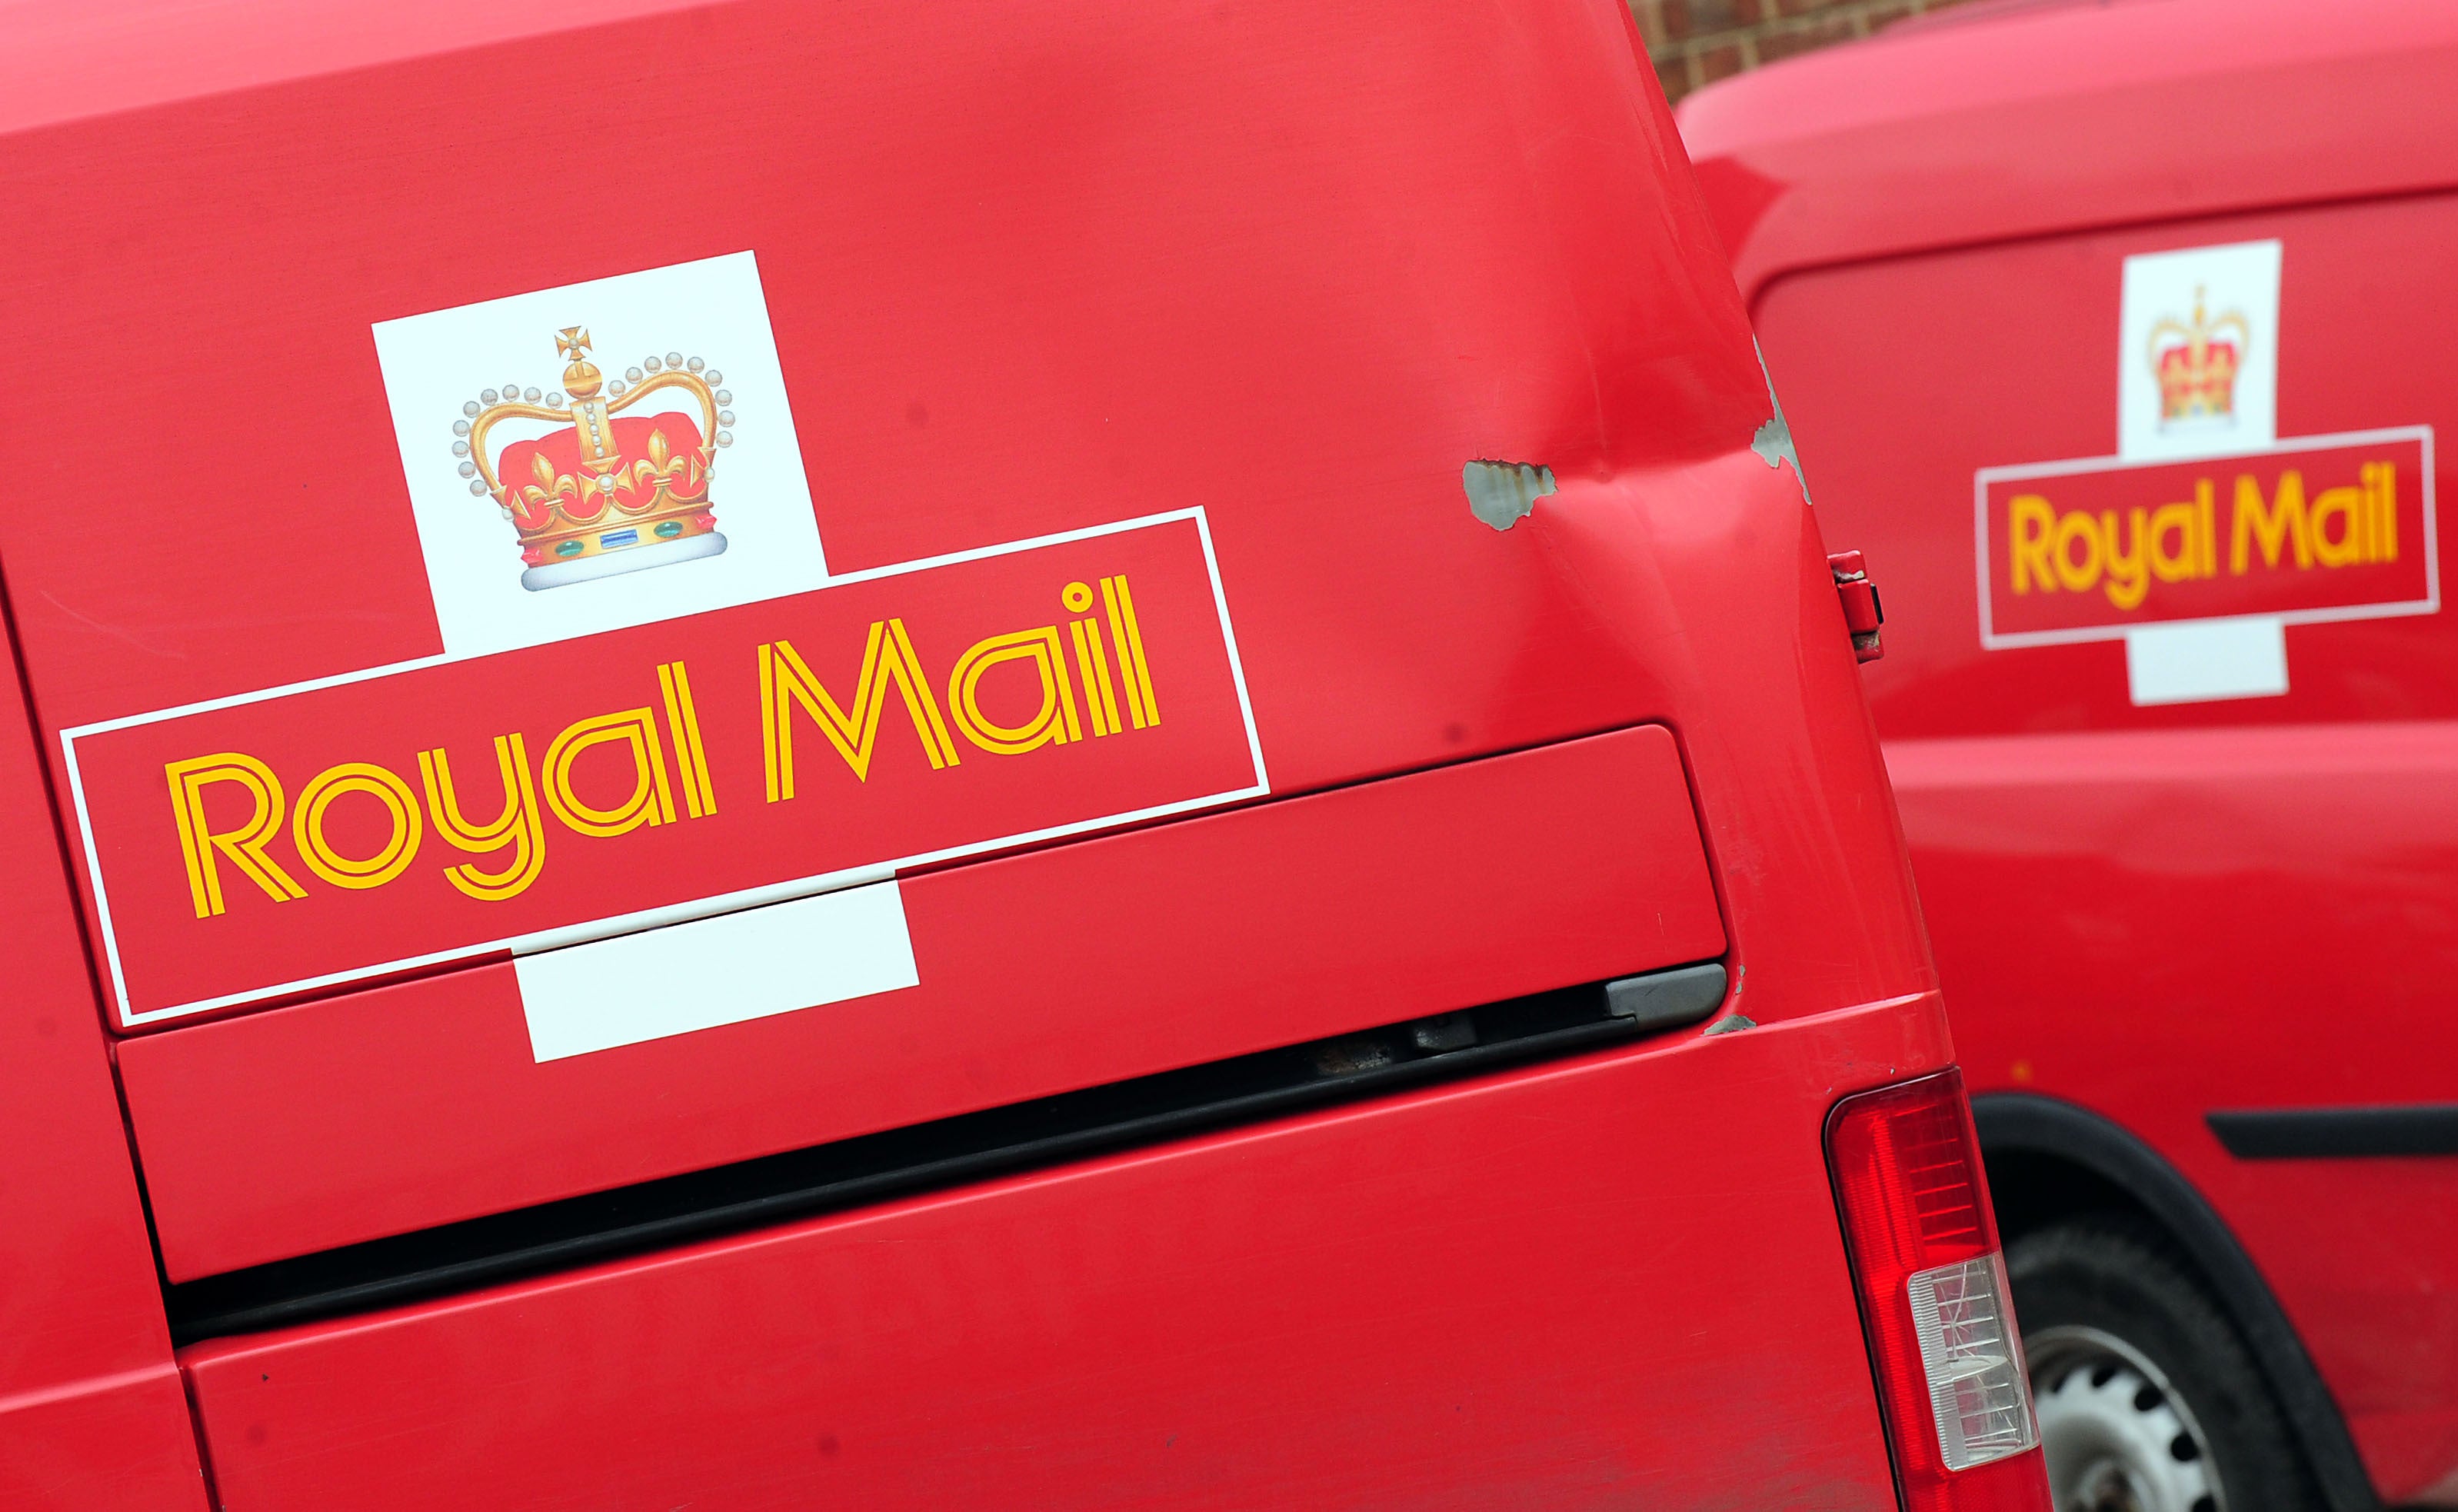 The Royal Mail trial hopes to better connect remote communities in the UK